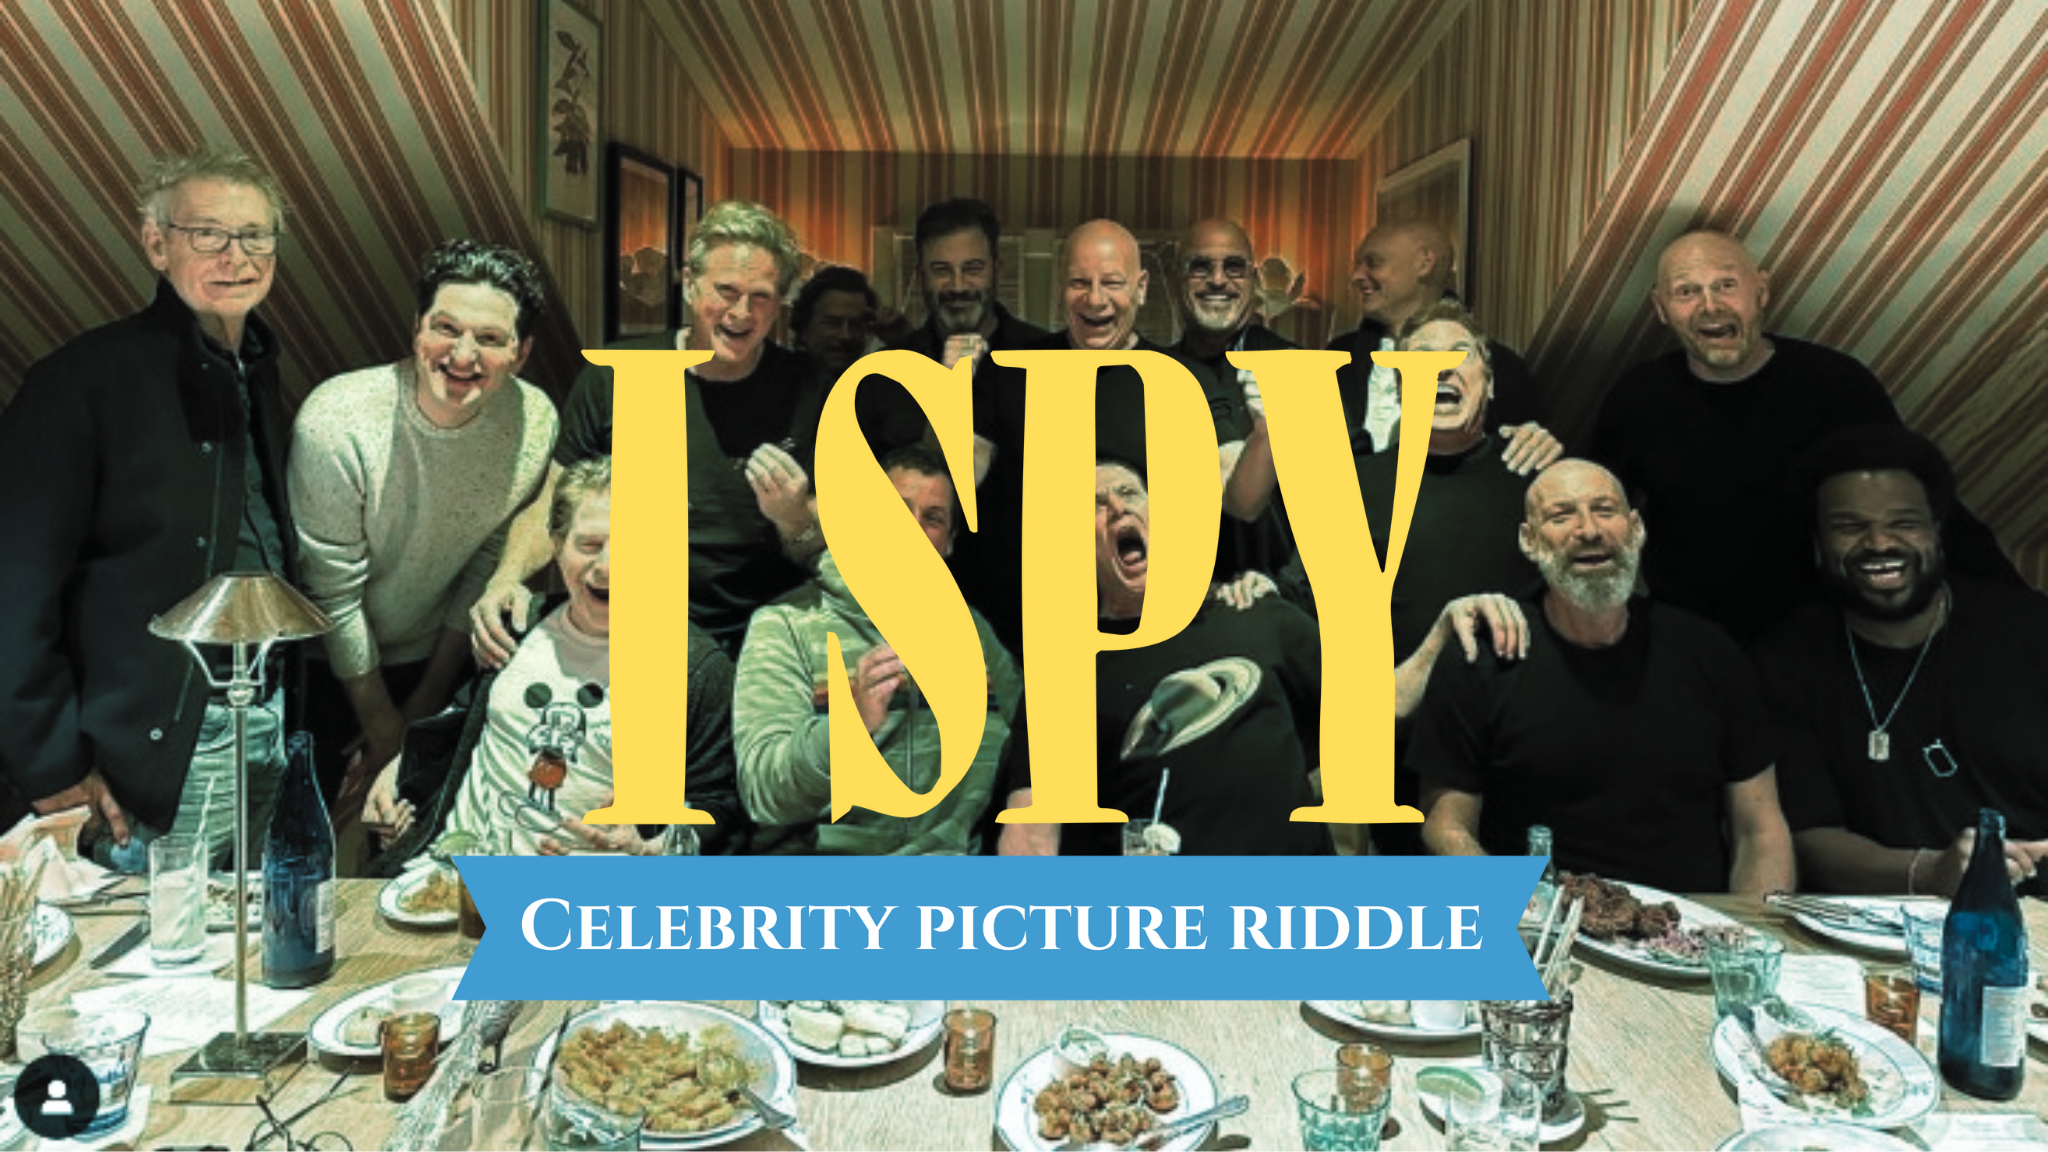 &quot;I Spy Celebrity Picture Riddle&quot; label showing guests at the birthday dinner in a &quot;Last Supper&quot;–type scene